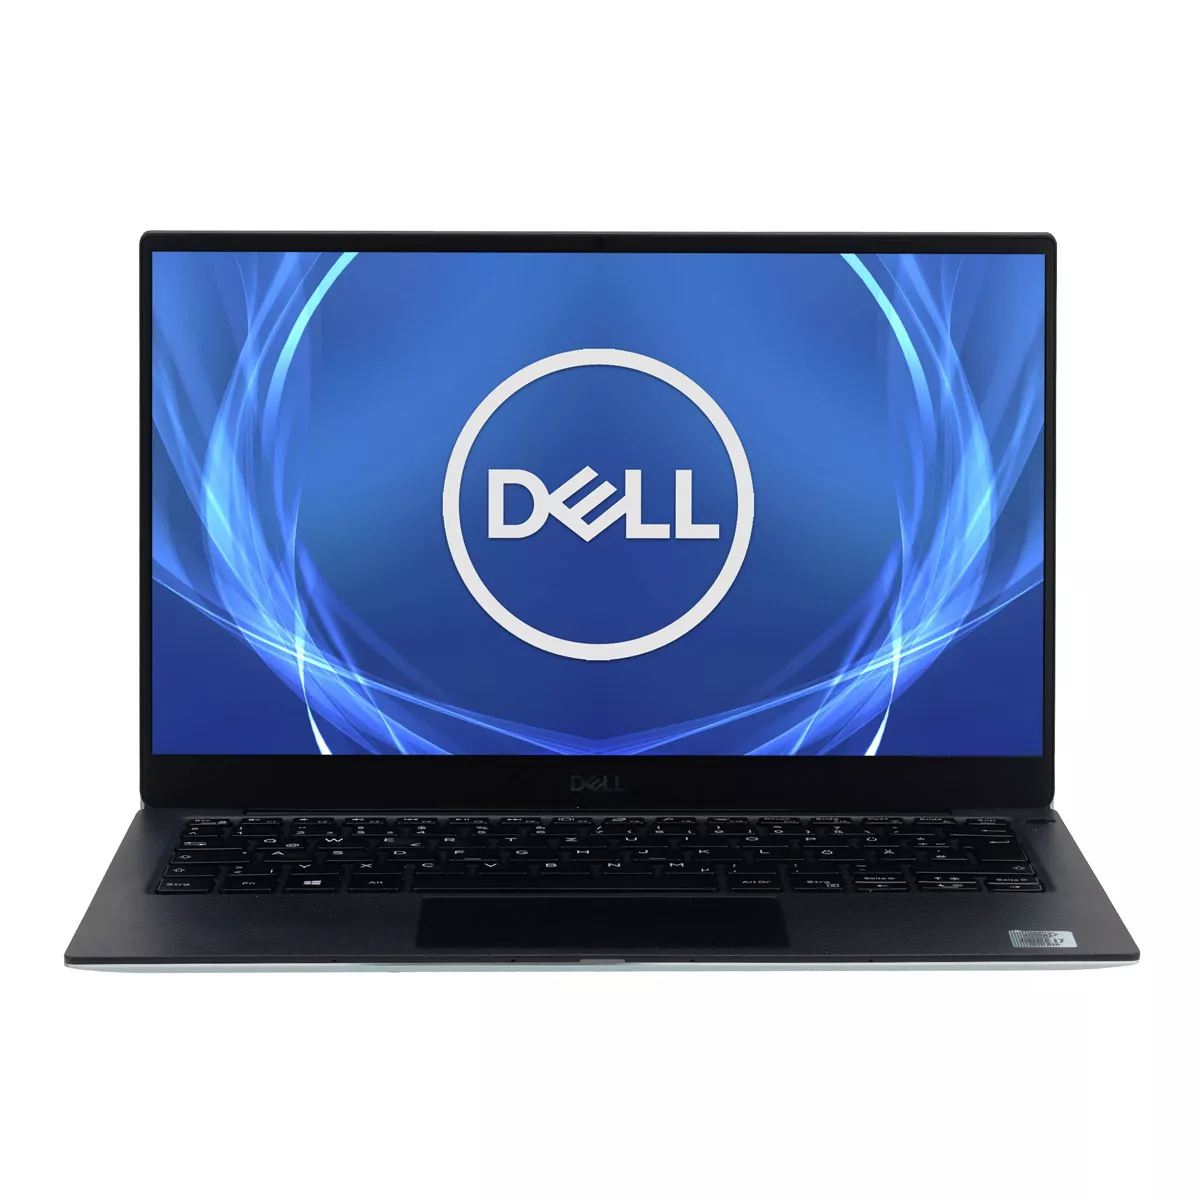 Dell XPS 13 - 7390 Core i7 10510U Touch 16 GB 500 GB M.2 nVME SSD Webcam A+